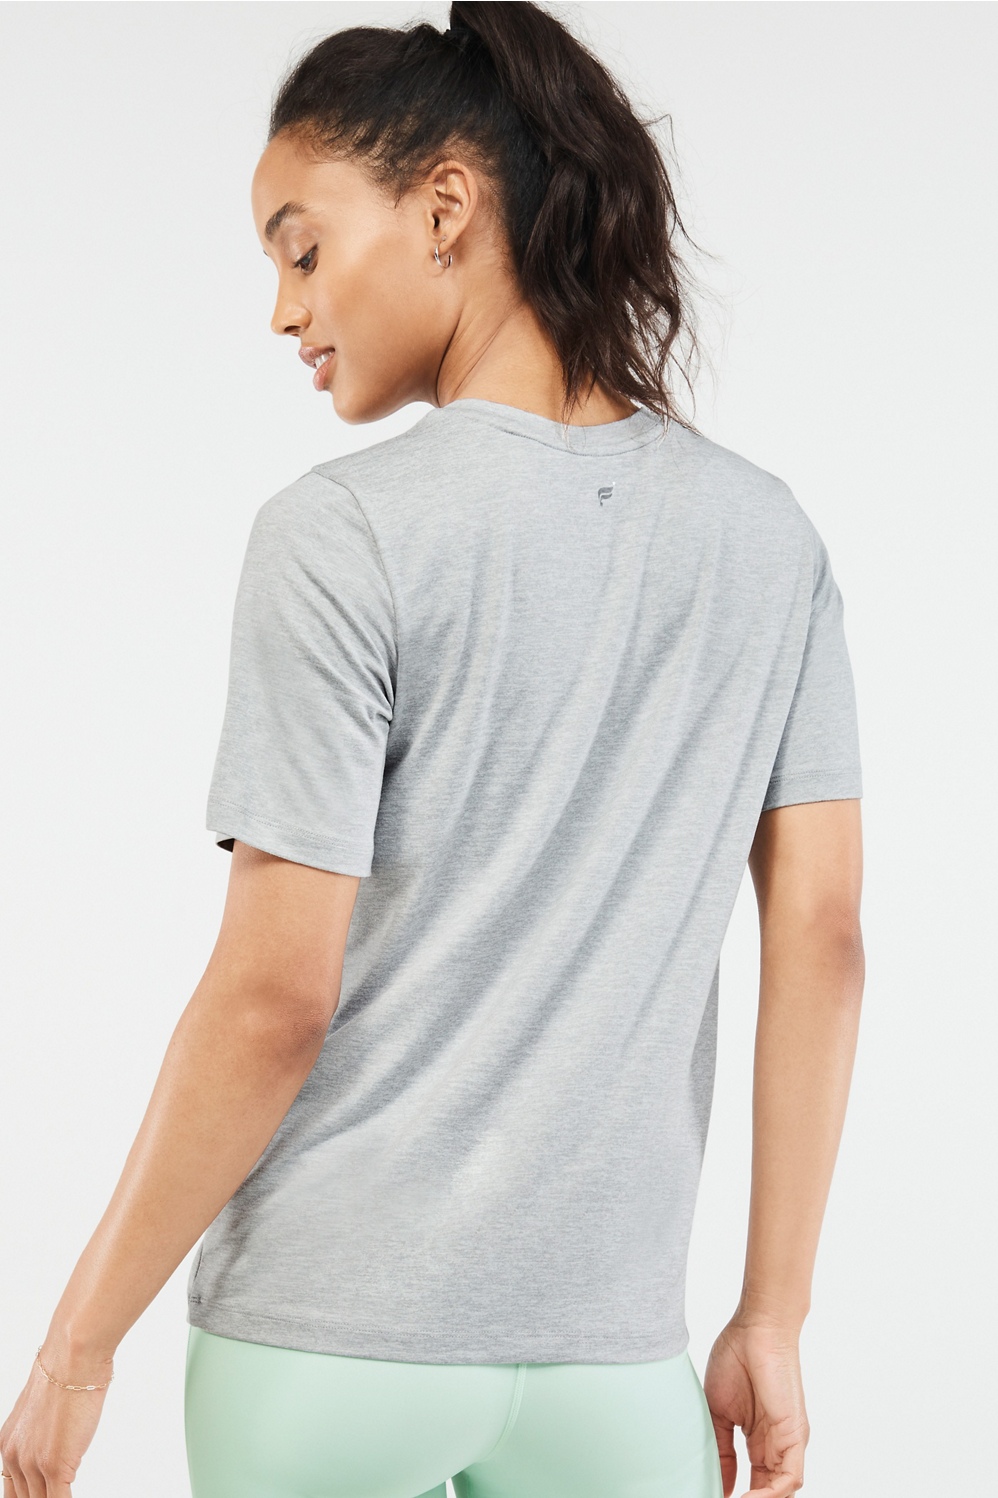 Fabletics Women's Dry-Flex Long-Sleeve Tee, Performance, Moisture Wicking,  Running, Recycled Polyester, Elastane, M, Soft Grey Heather at   Women's Clothing store